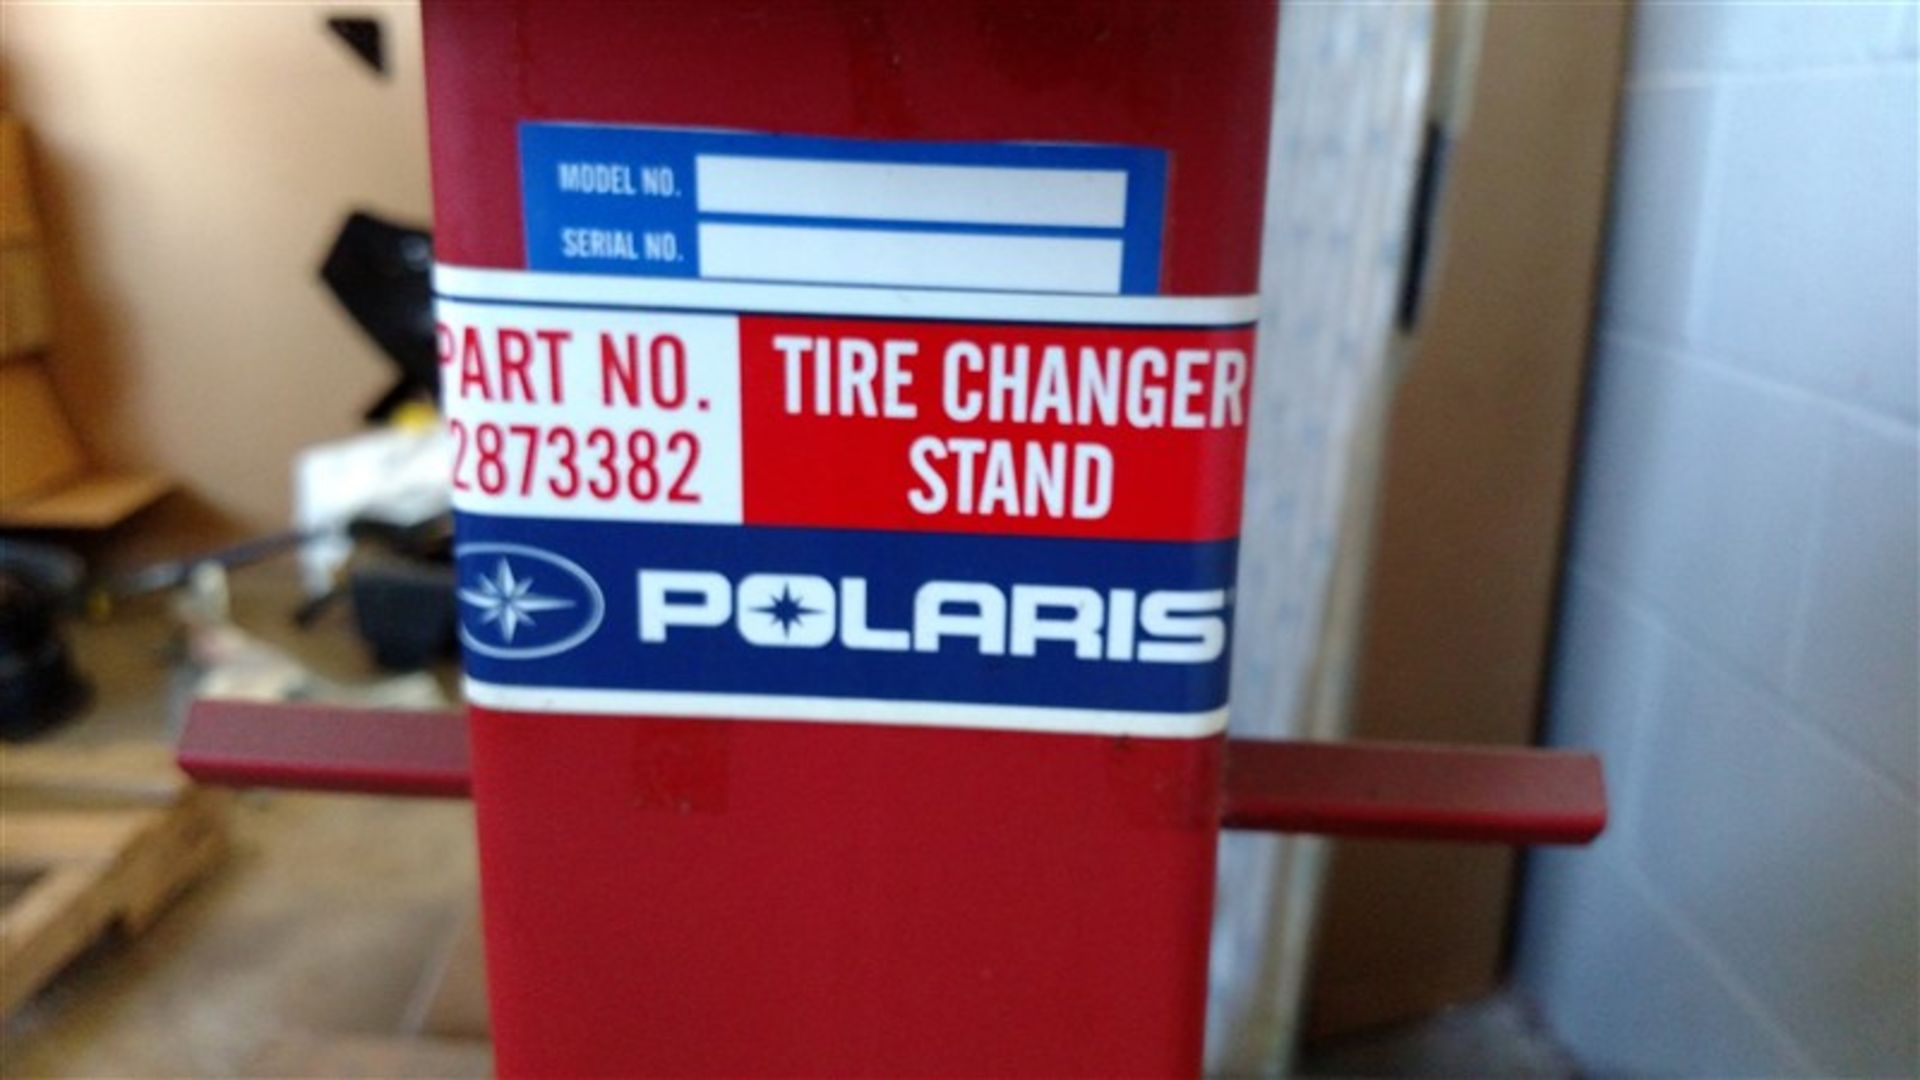 Polaris Tire Changer Stand - Image 2 of 2